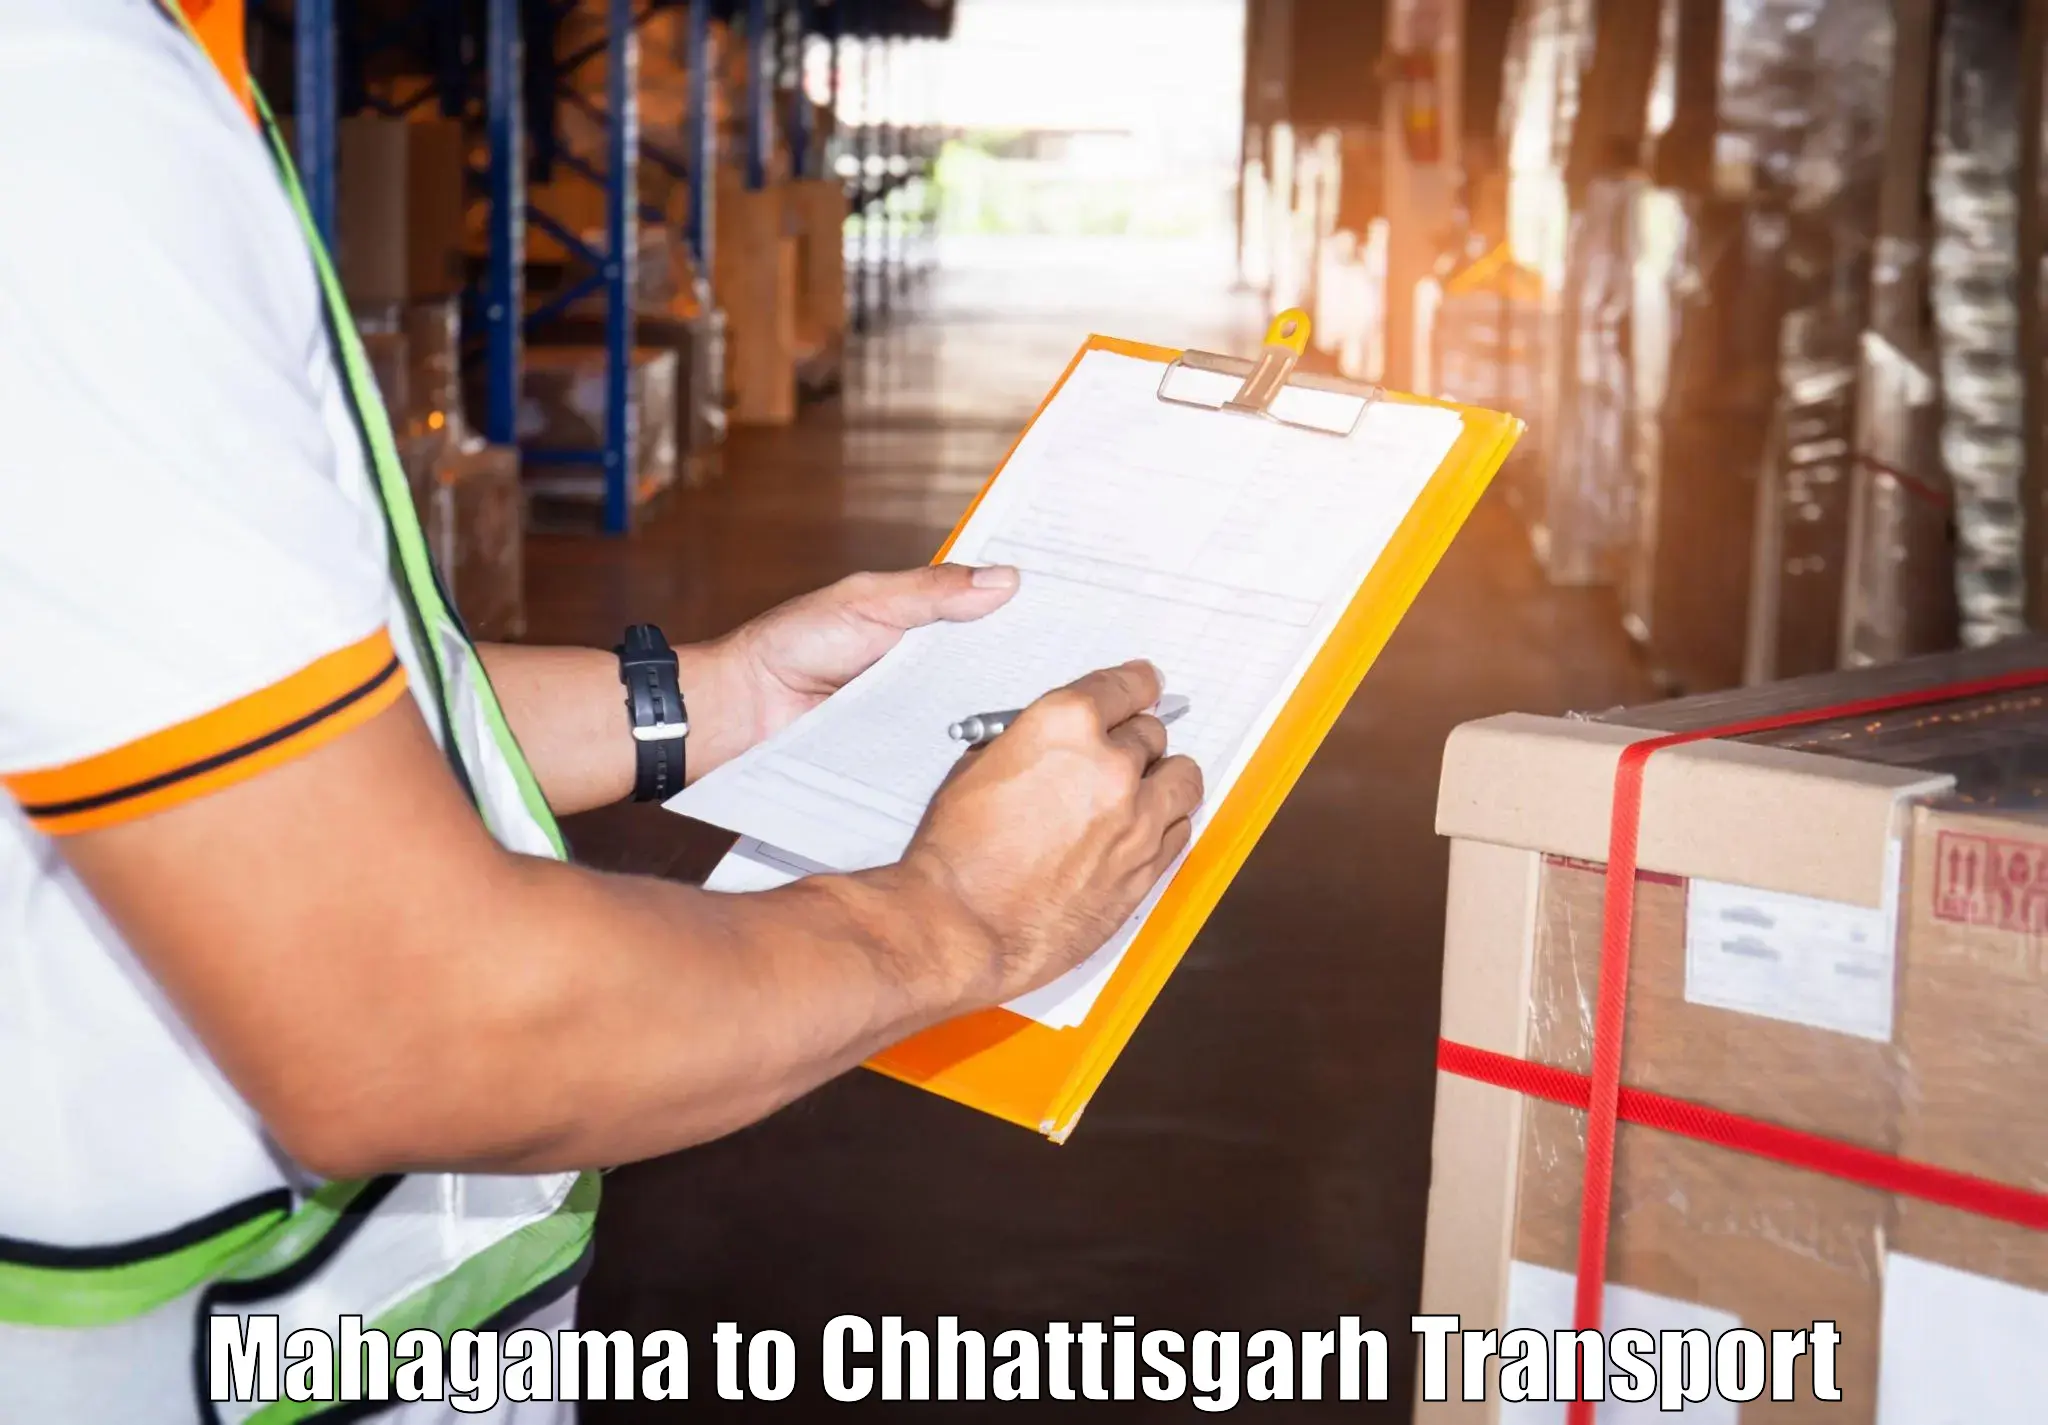 Commercial transport service Mahagama to Ratanpur